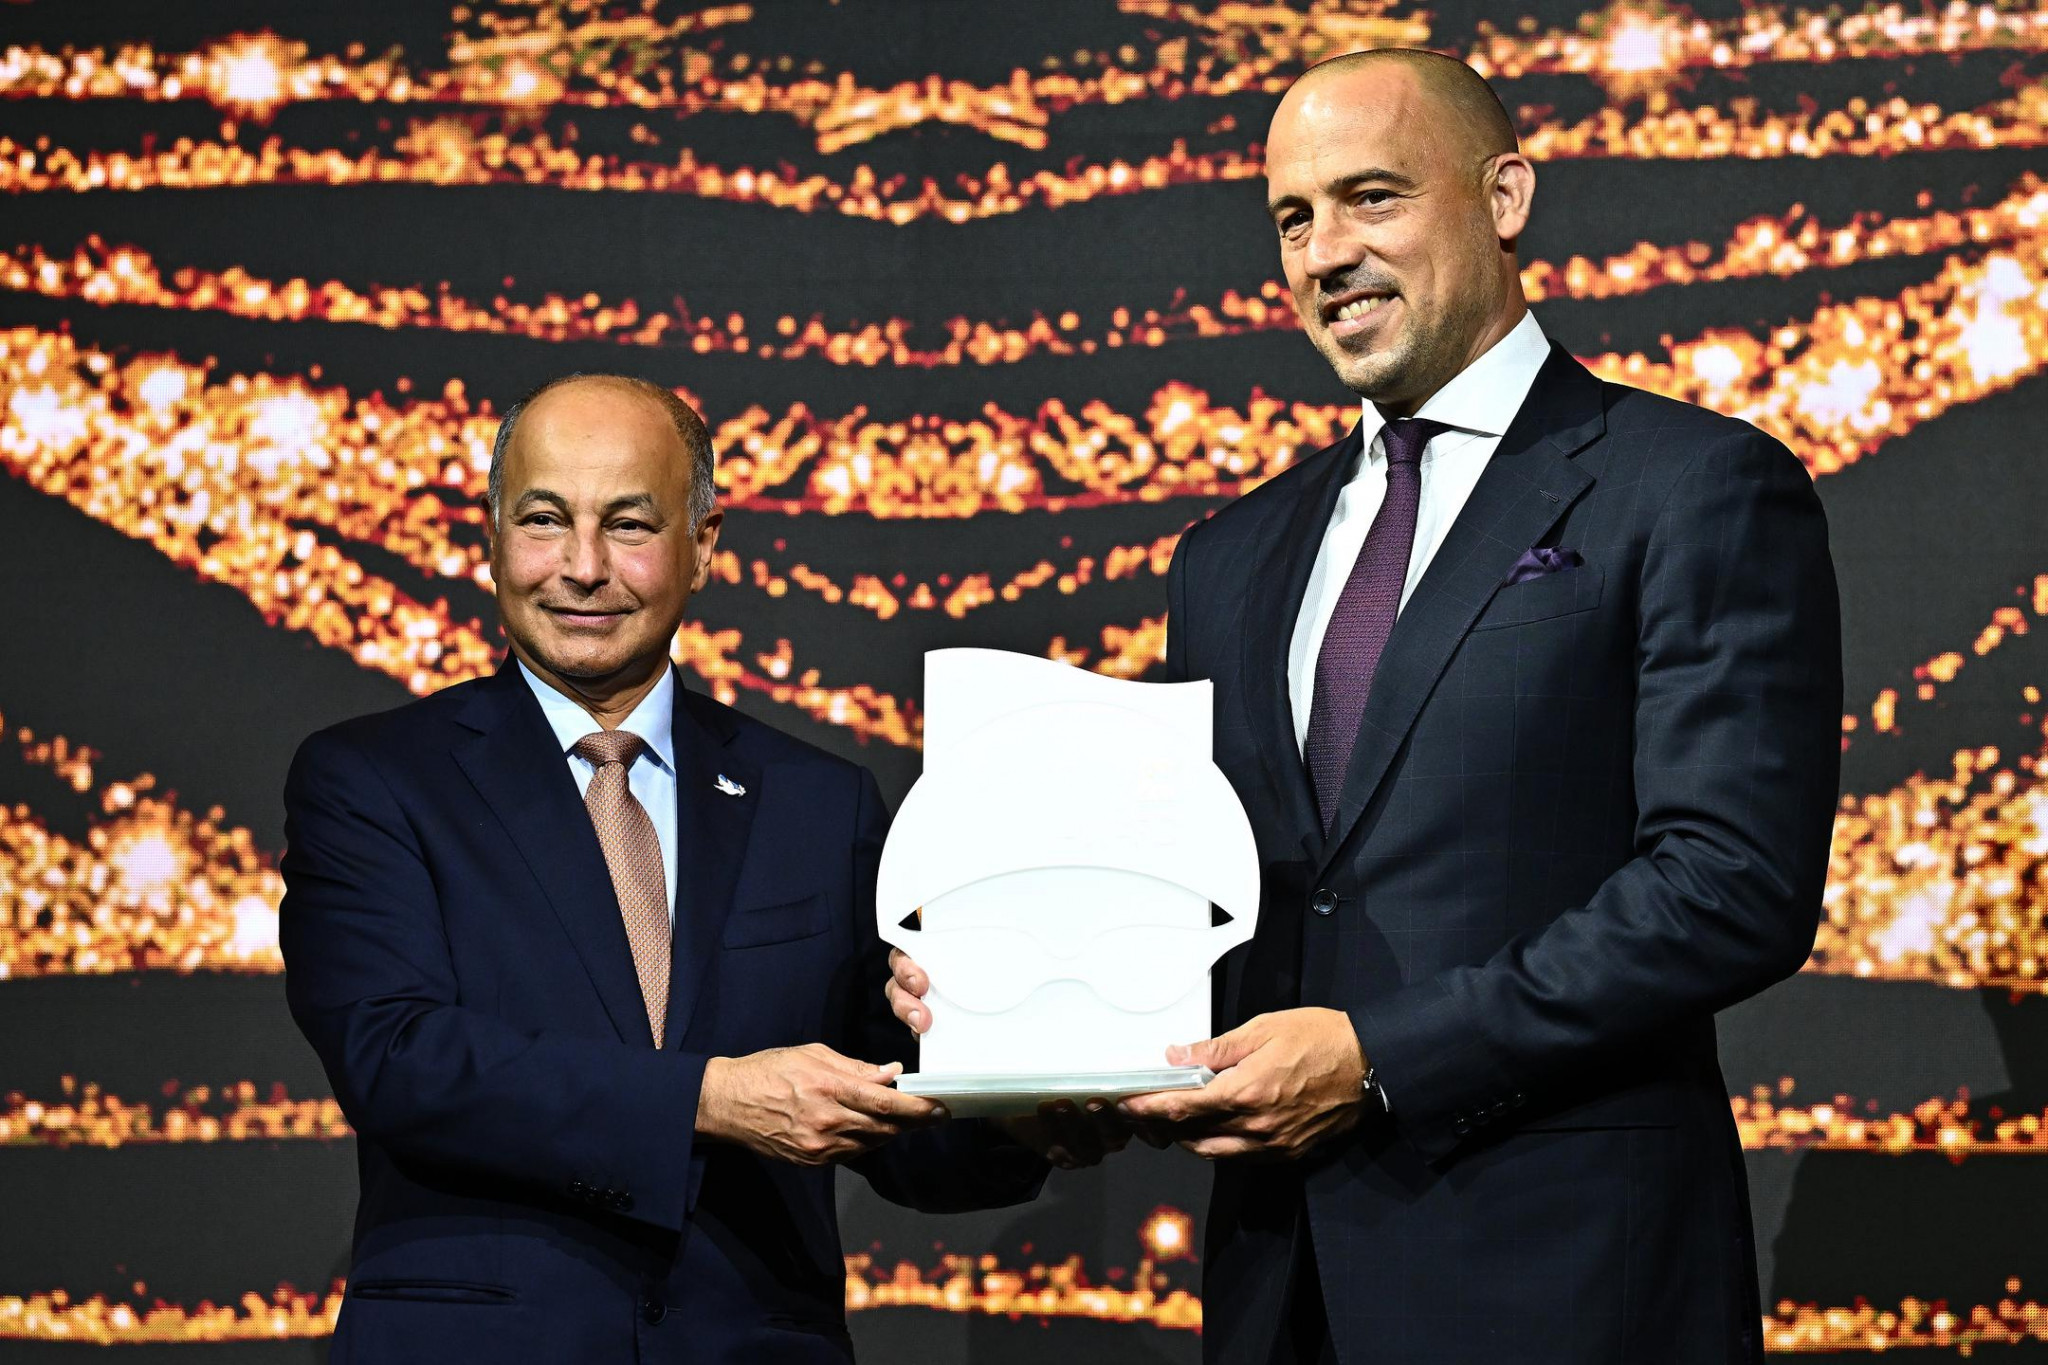 Gifts were exchanged between FINA and the Budapest 2022 Organising Committee at the gala dinner ©FINA